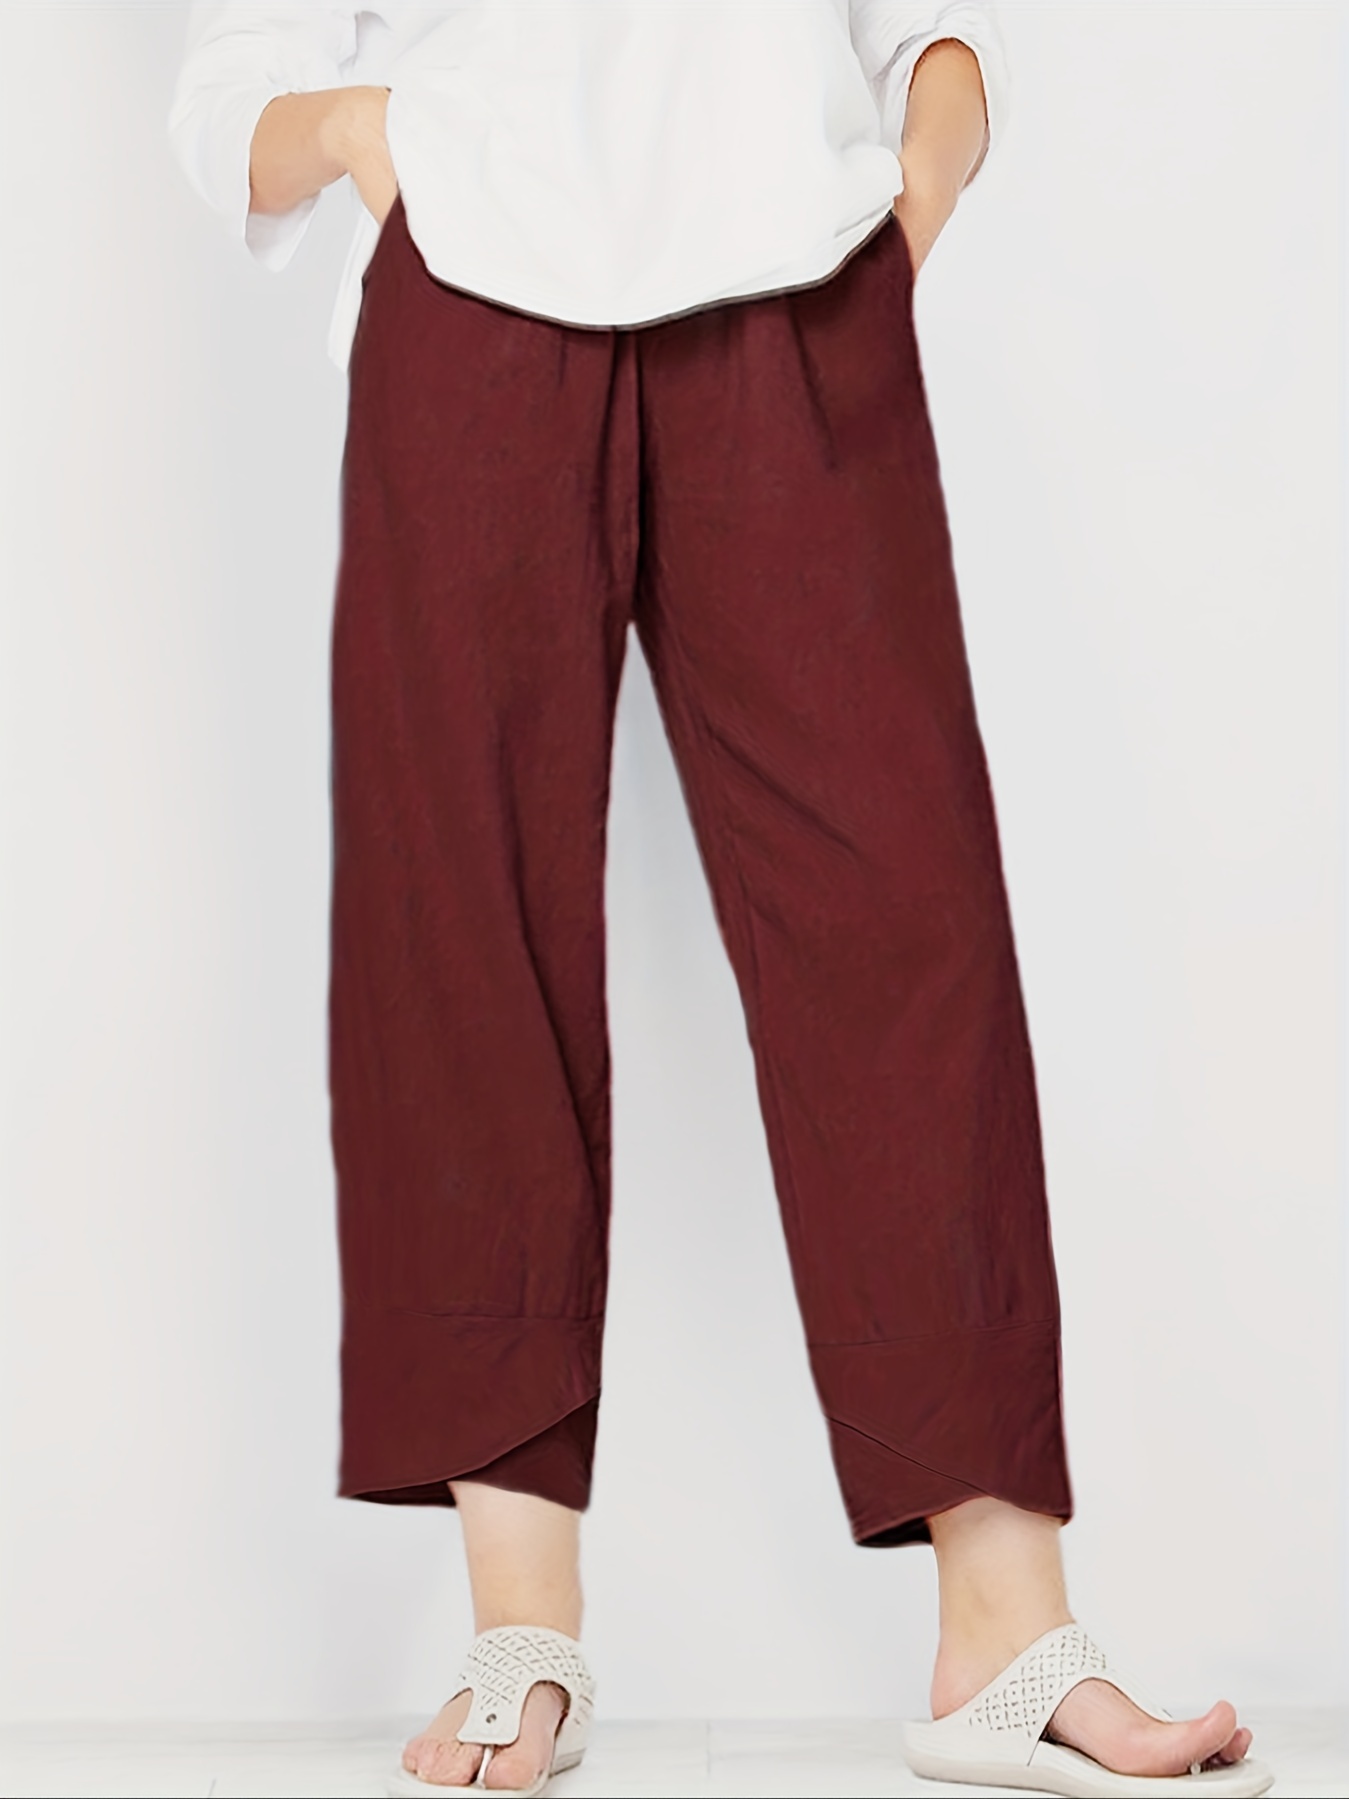 Women's Summer Trousers 7/8 Red Casual Elastic Waist Trousers for Women  Solid Comfortable Casual Cotton Linen Trousers with Pockets Short Trousers